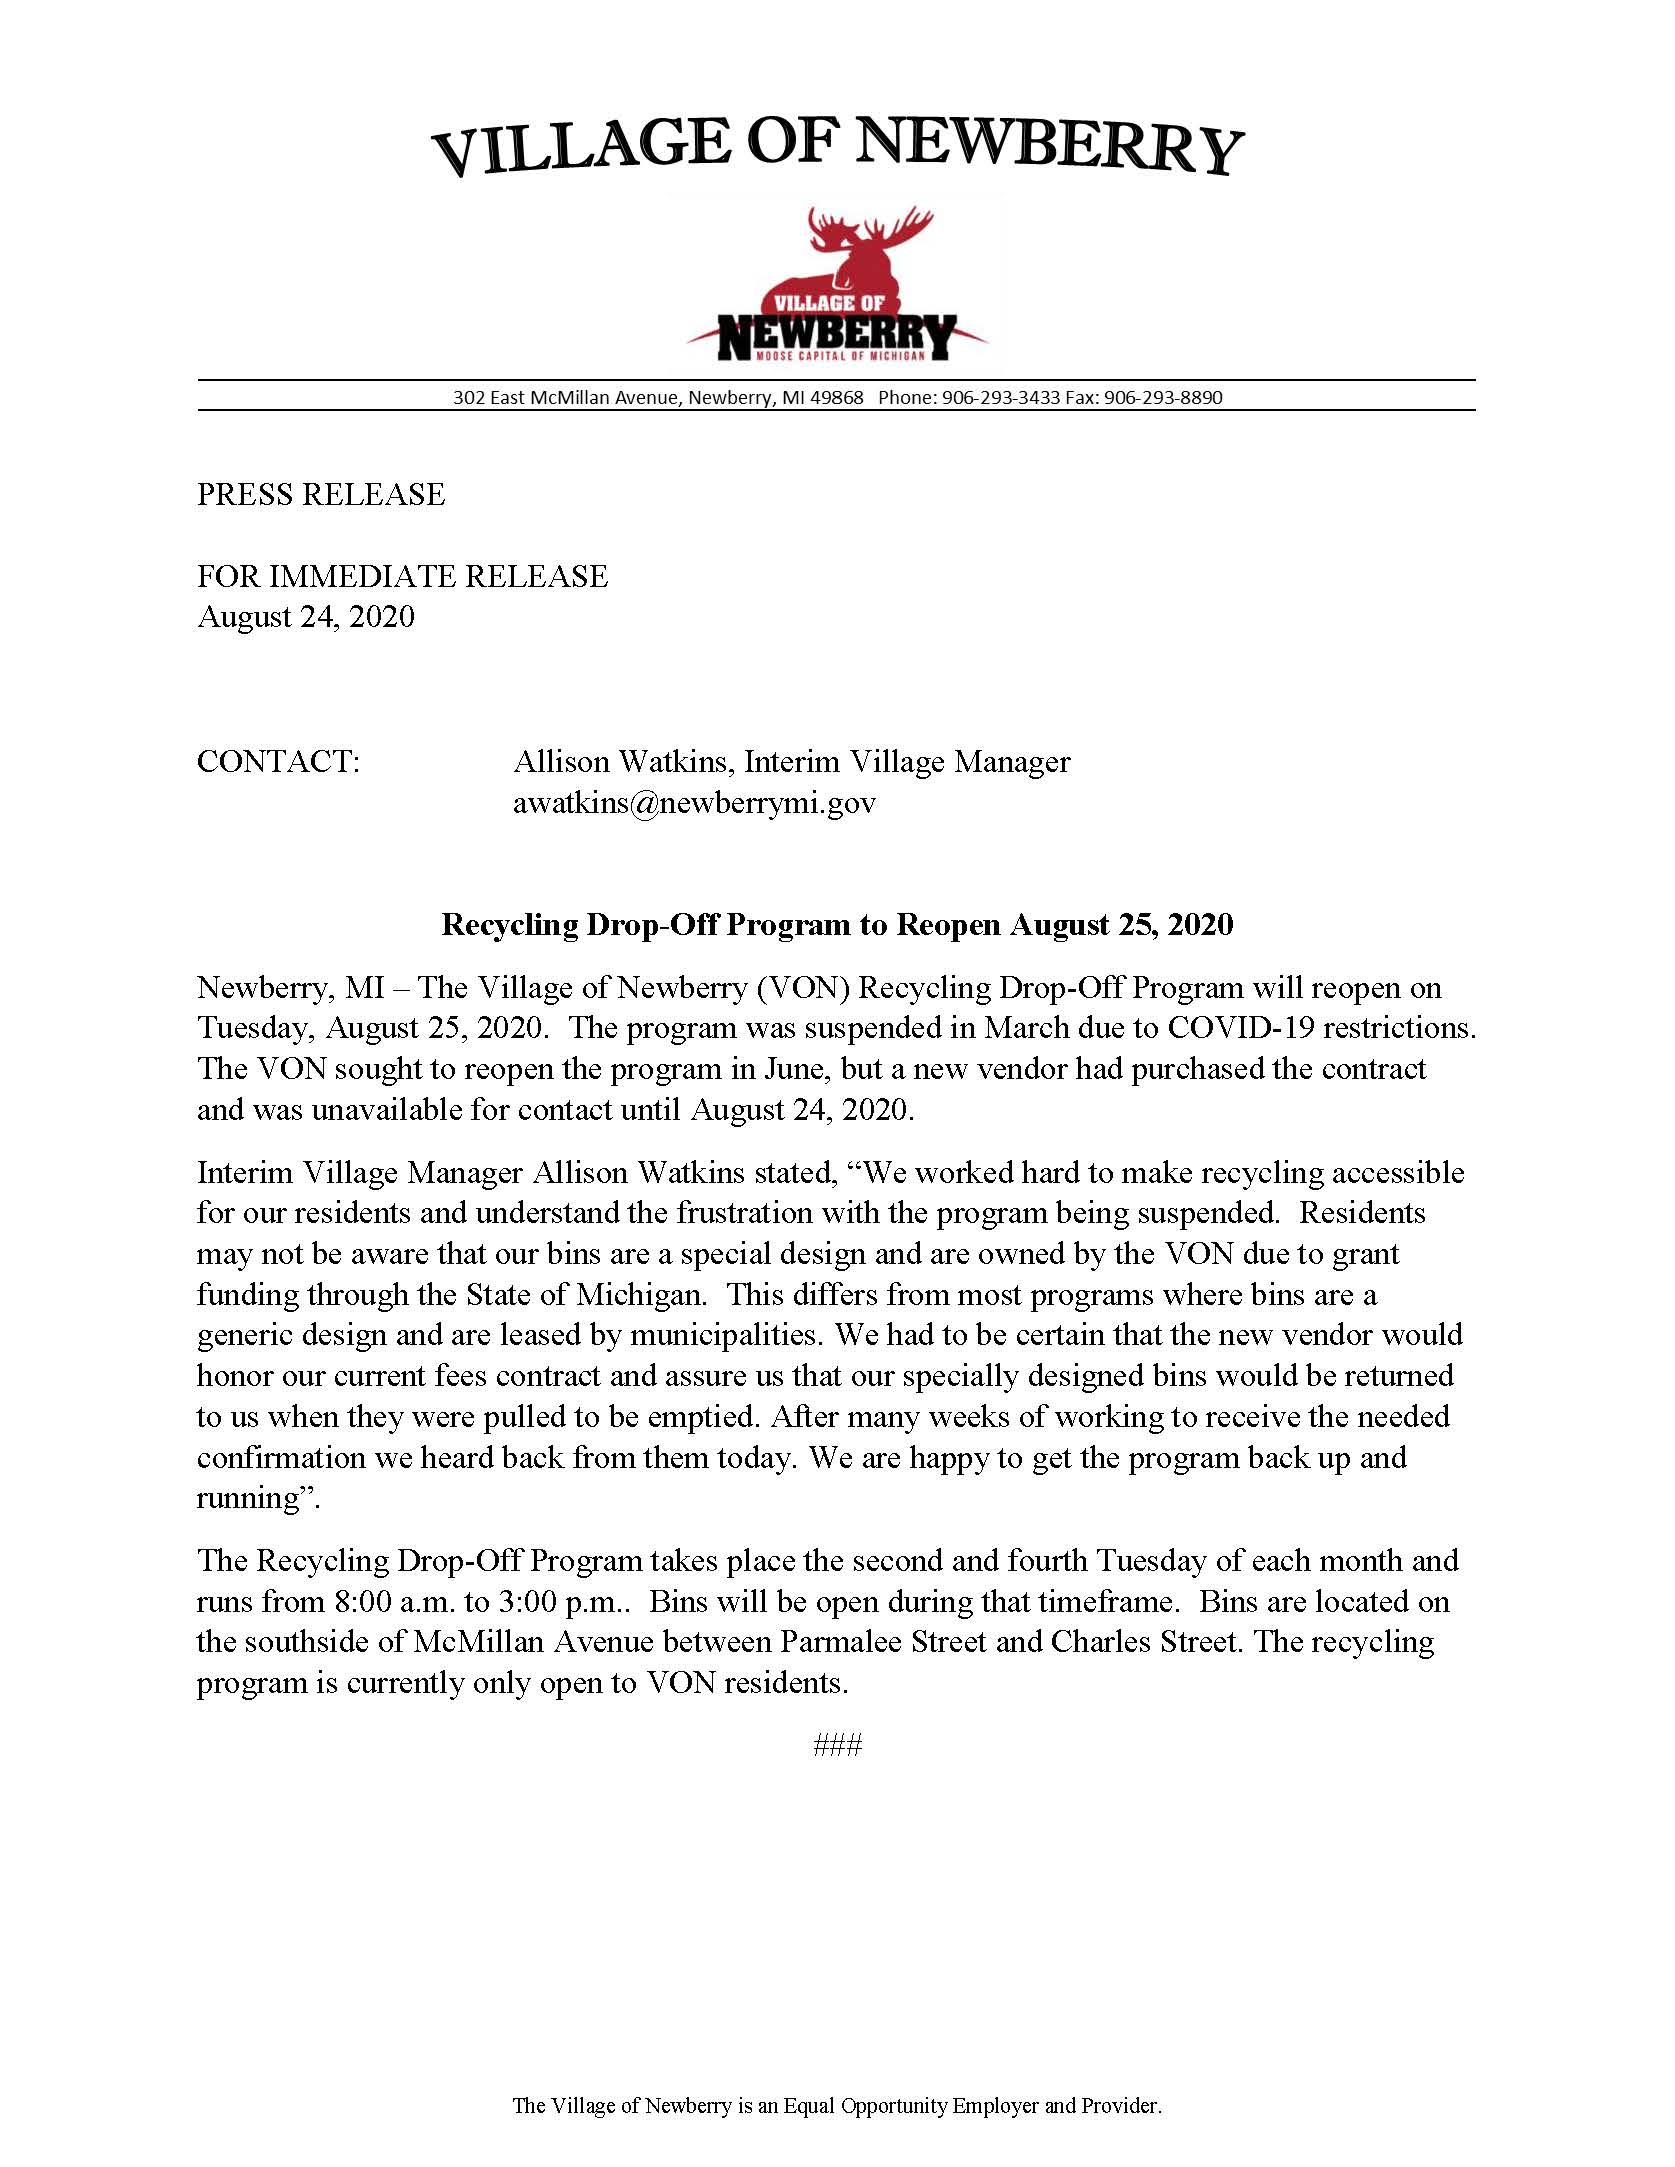 Press Release - Recycling Drop-Off Reopening August 2020